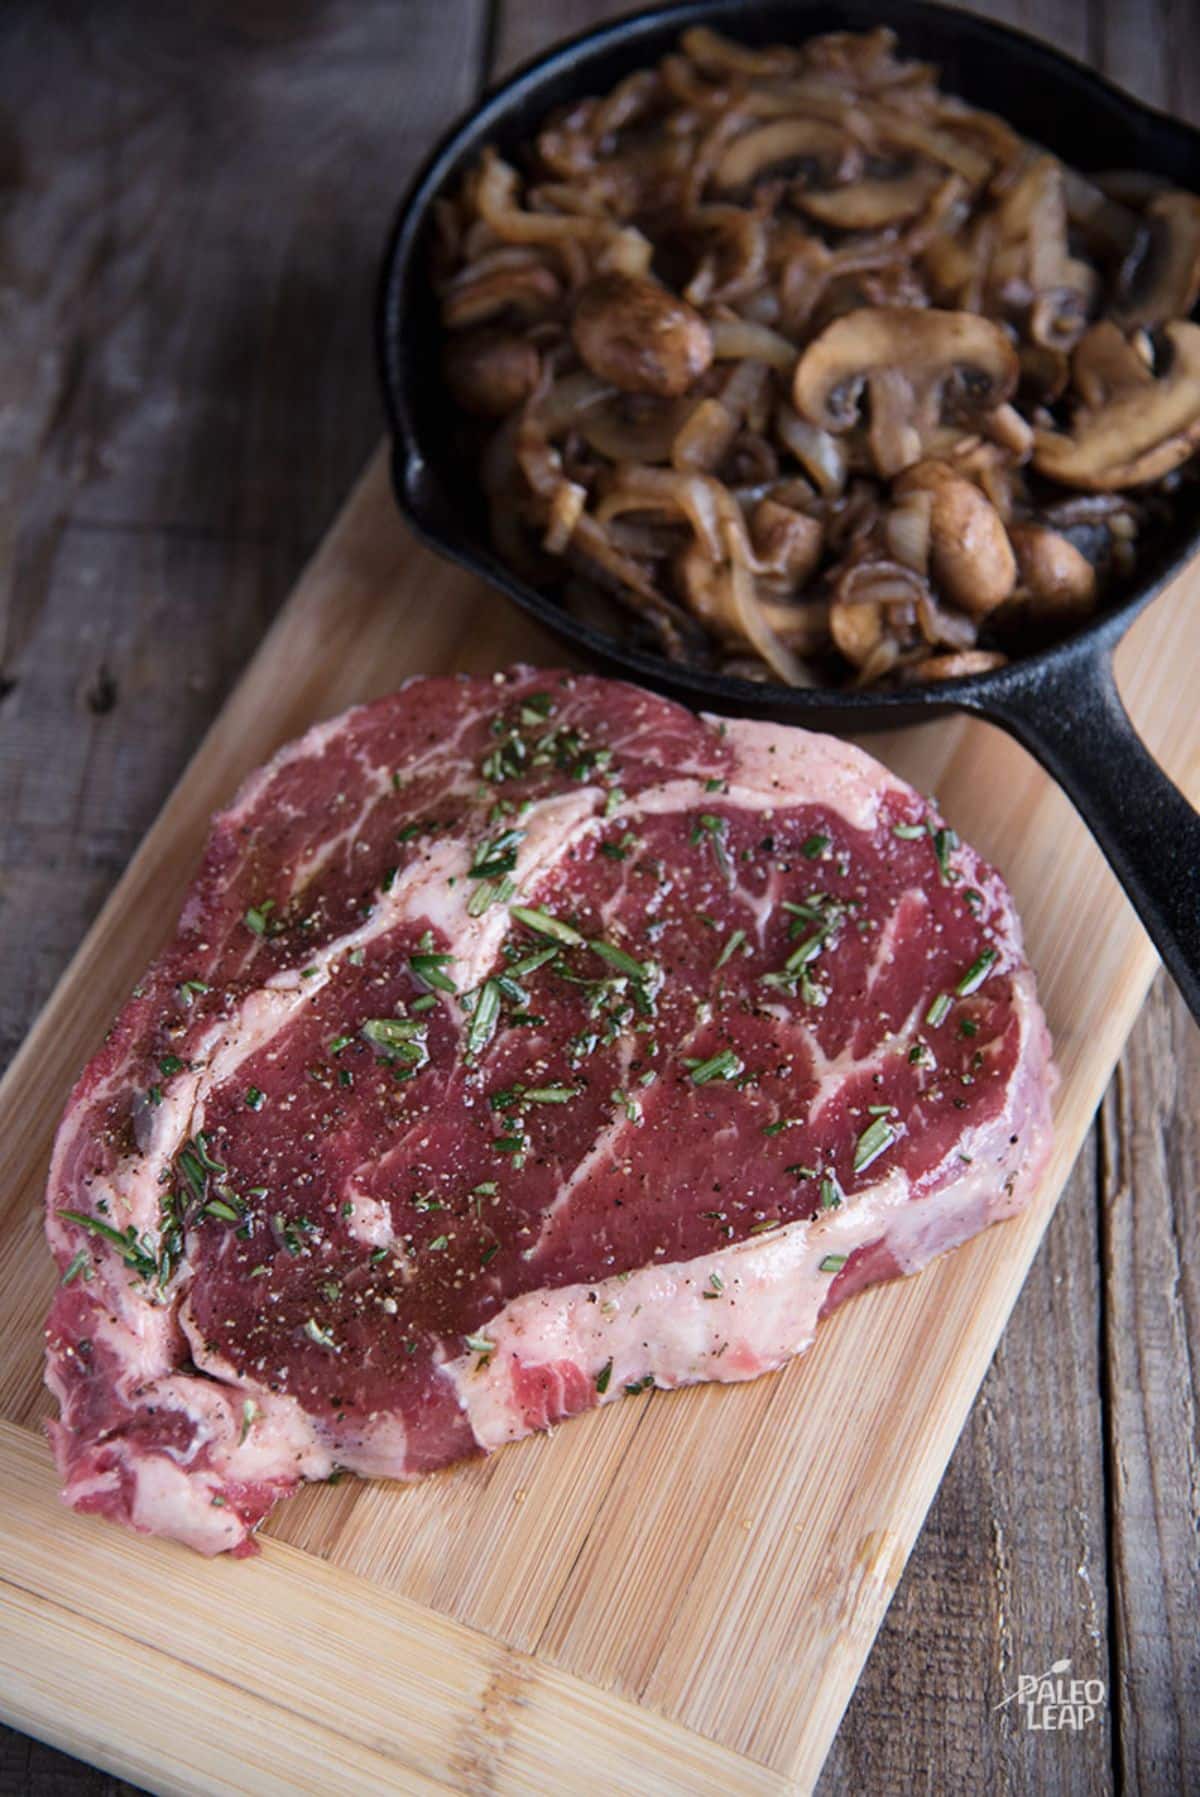 Ribeye With Caramelized Onions And Mushrooms Recipe Preparation